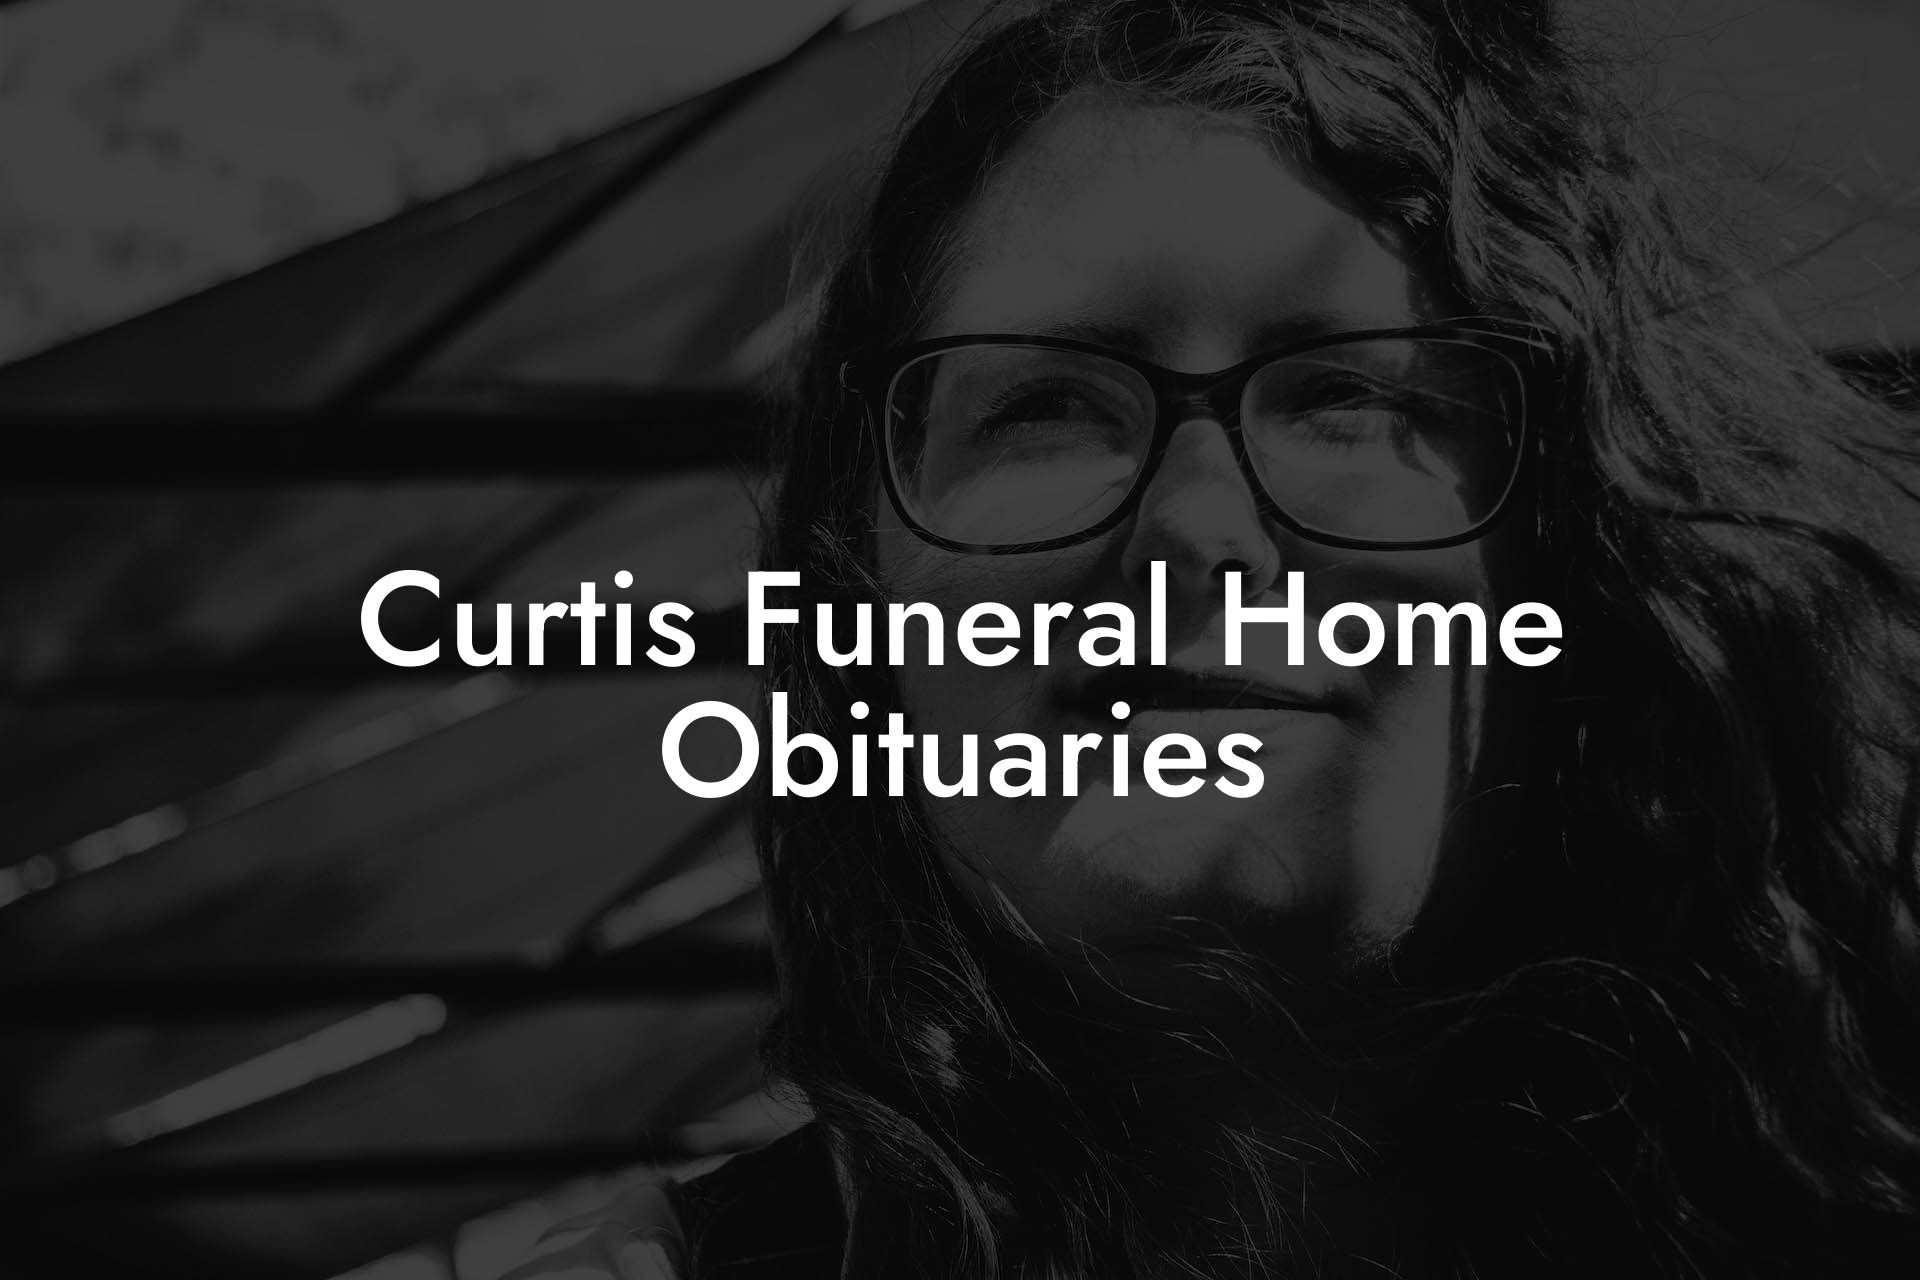 Curtis Funeral Home Obituaries